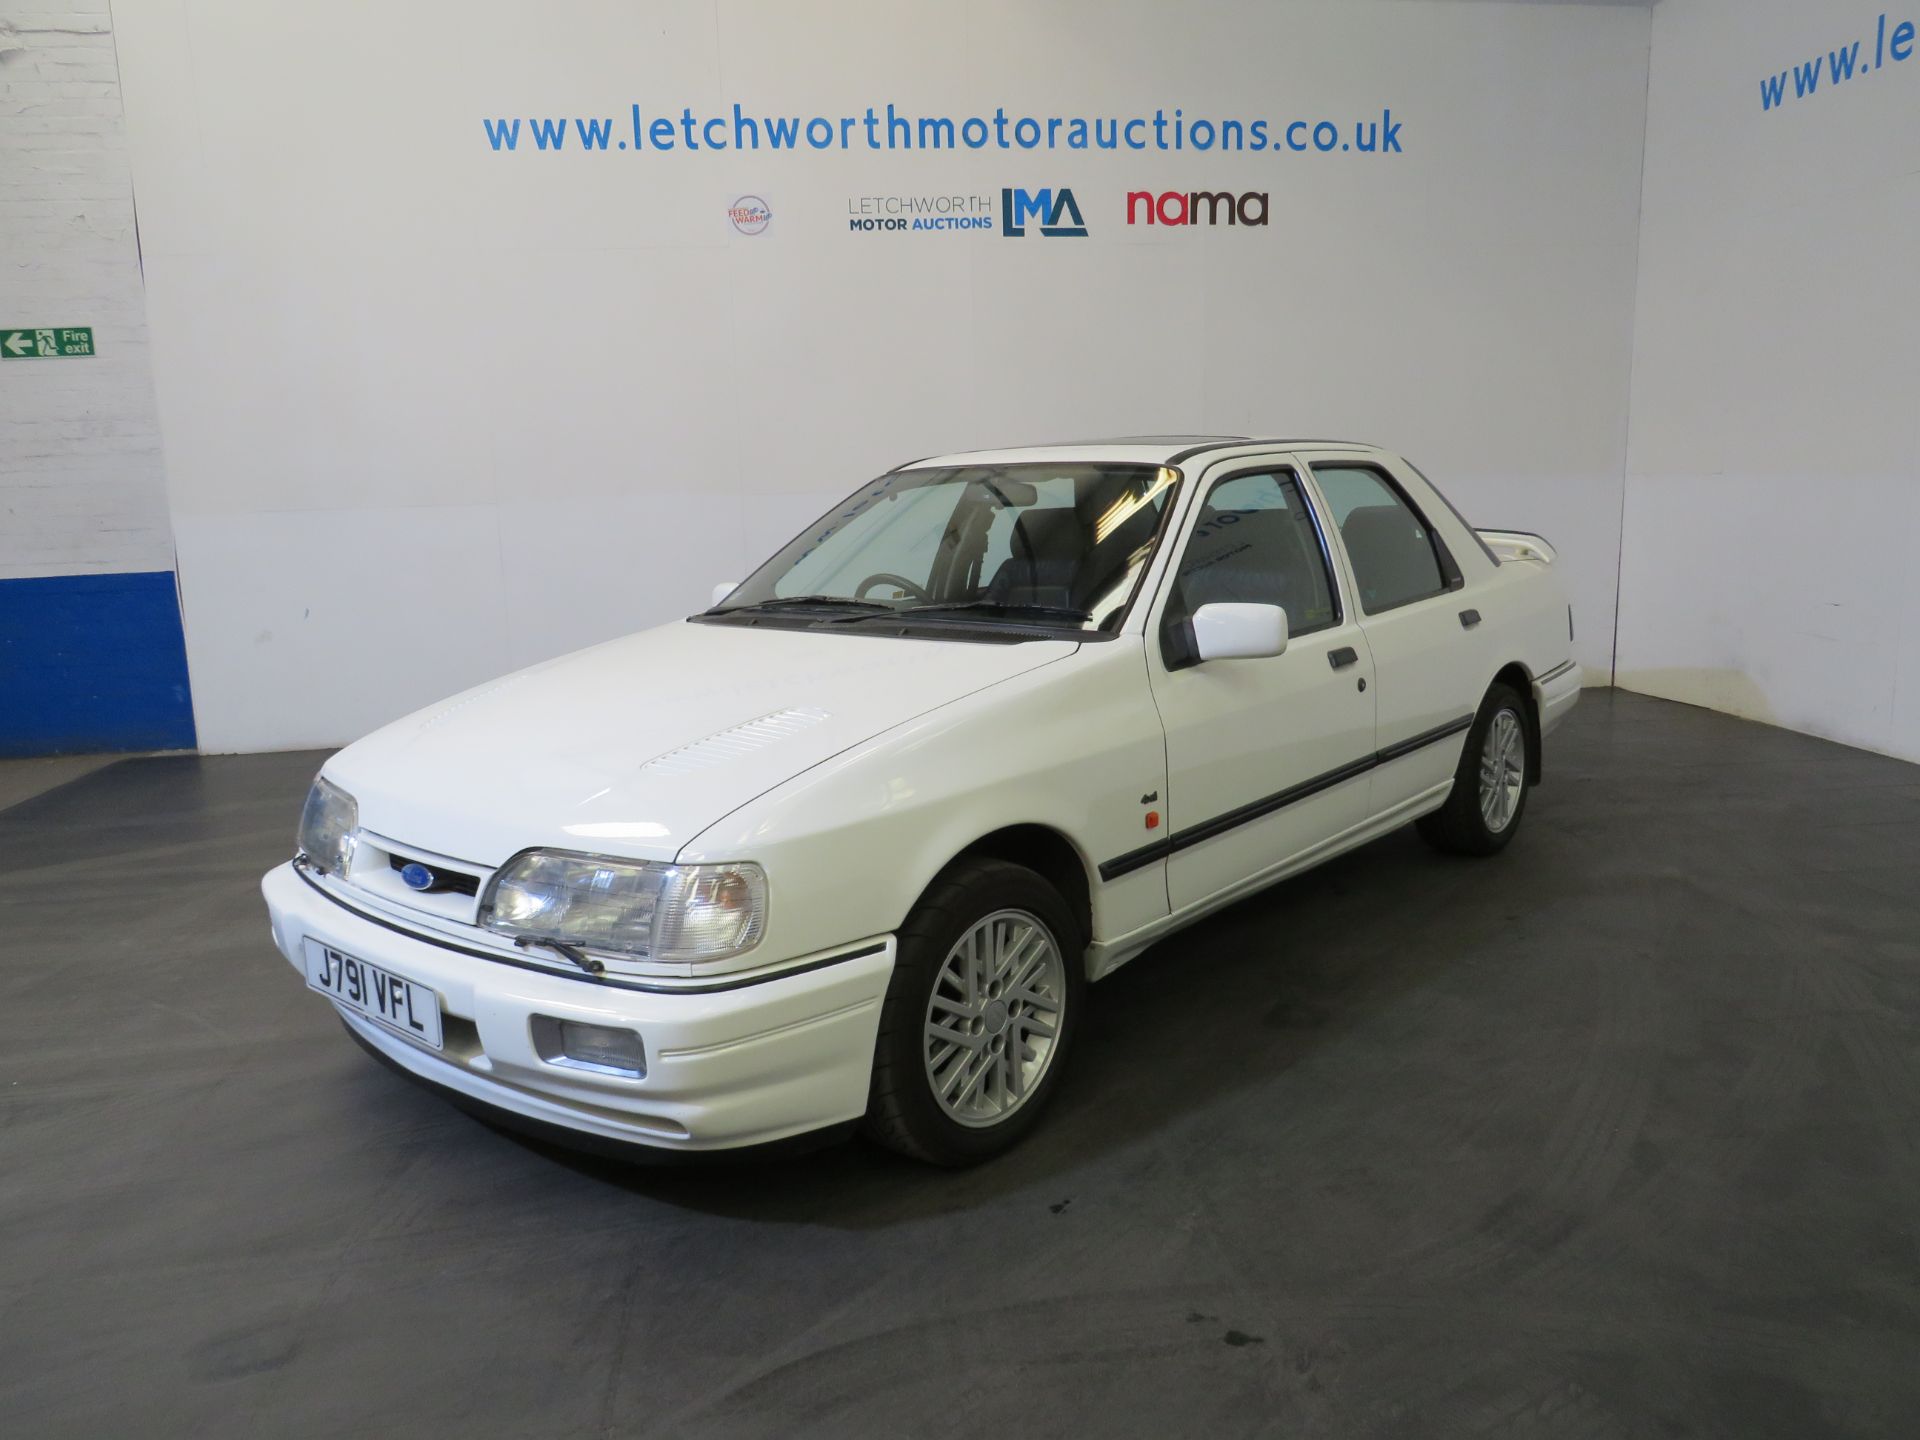 1991 Ford Sierra Sapphire Cosworth 4x4 - 1993cc - Image 3 of 19